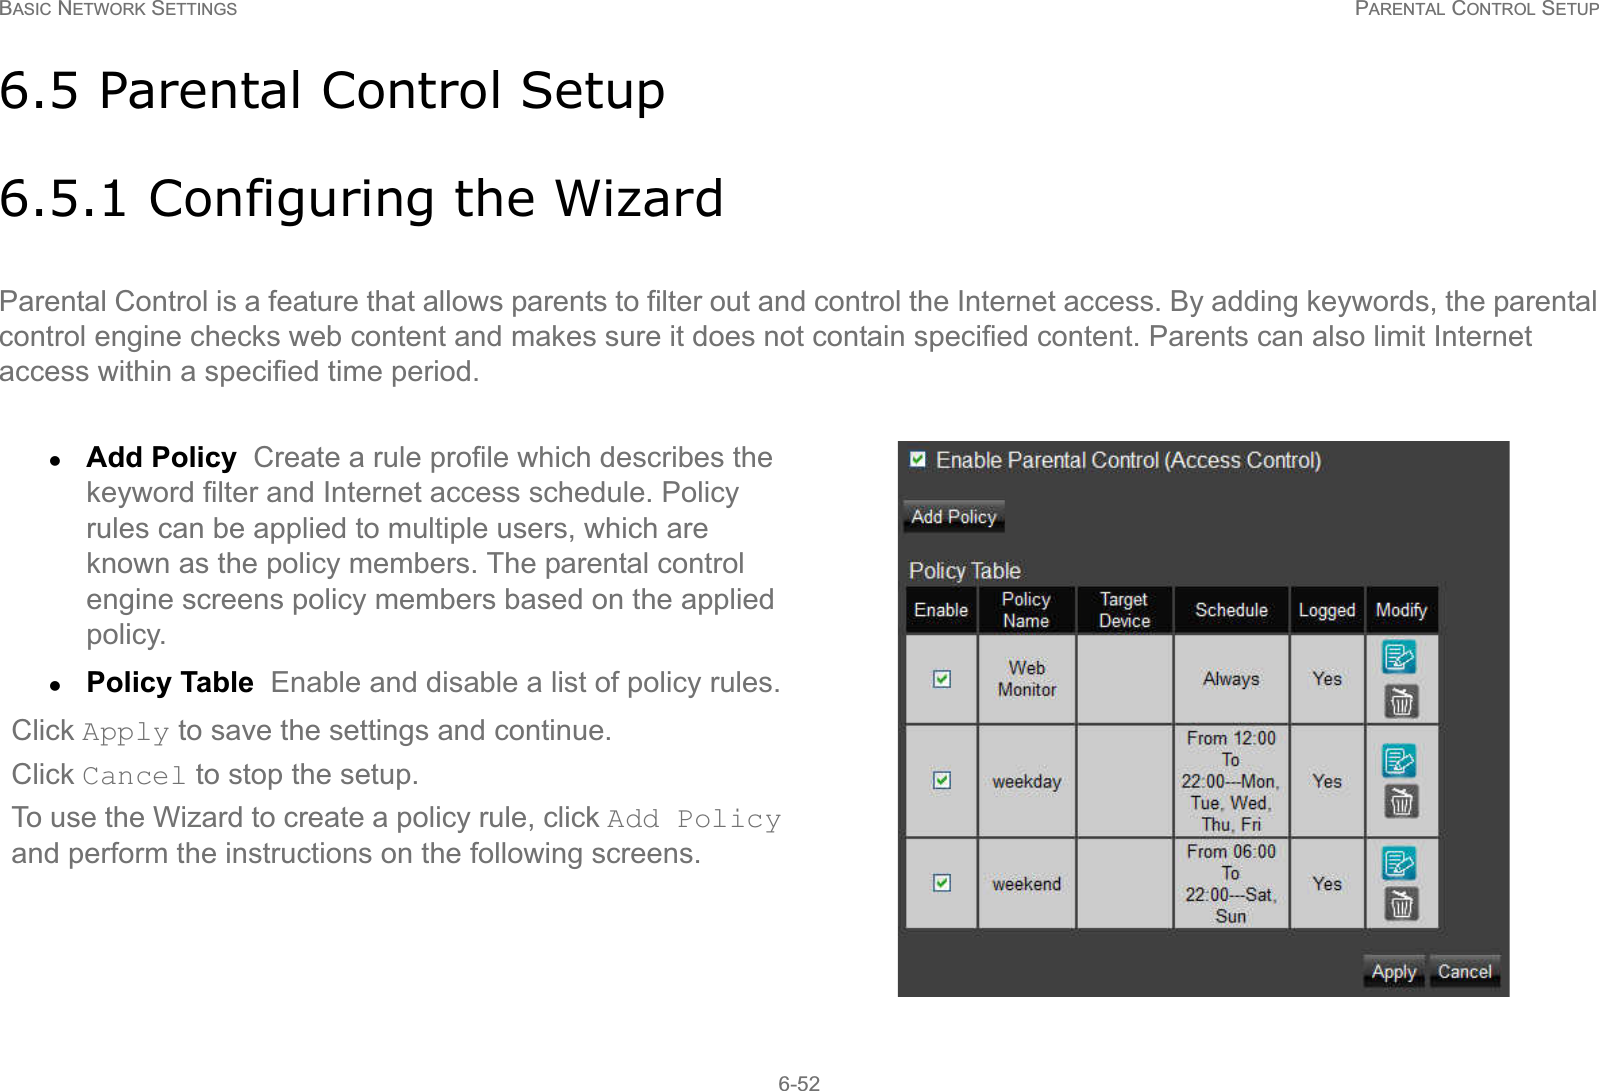 BASIC NETWORK SETTINGS PARENTAL CONTROL SETUP6-526.5 Parental Control Setup6.5.1 Configuring the WizardParental Control is a feature that allows parents to filter out and control the Internet access. By adding keywords, the parental control engine checks web content and makes sure it does not contain specified content. Parents can also limit Internet access within a specified time period.zAdd Policy  Create a rule profile which describes the keyword filter and Internet access schedule. Policy rules can be applied to multiple users, which are known as the policy members. The parental control engine screens policy members based on the applied policy.zPolicy Table  Enable and disable a list of policy rules.Click Apply to save the settings and continue.Click Cancel to stop the setup.To use the Wizard to create a policy rule, click Add Policy and perform the instructions on the following screens.